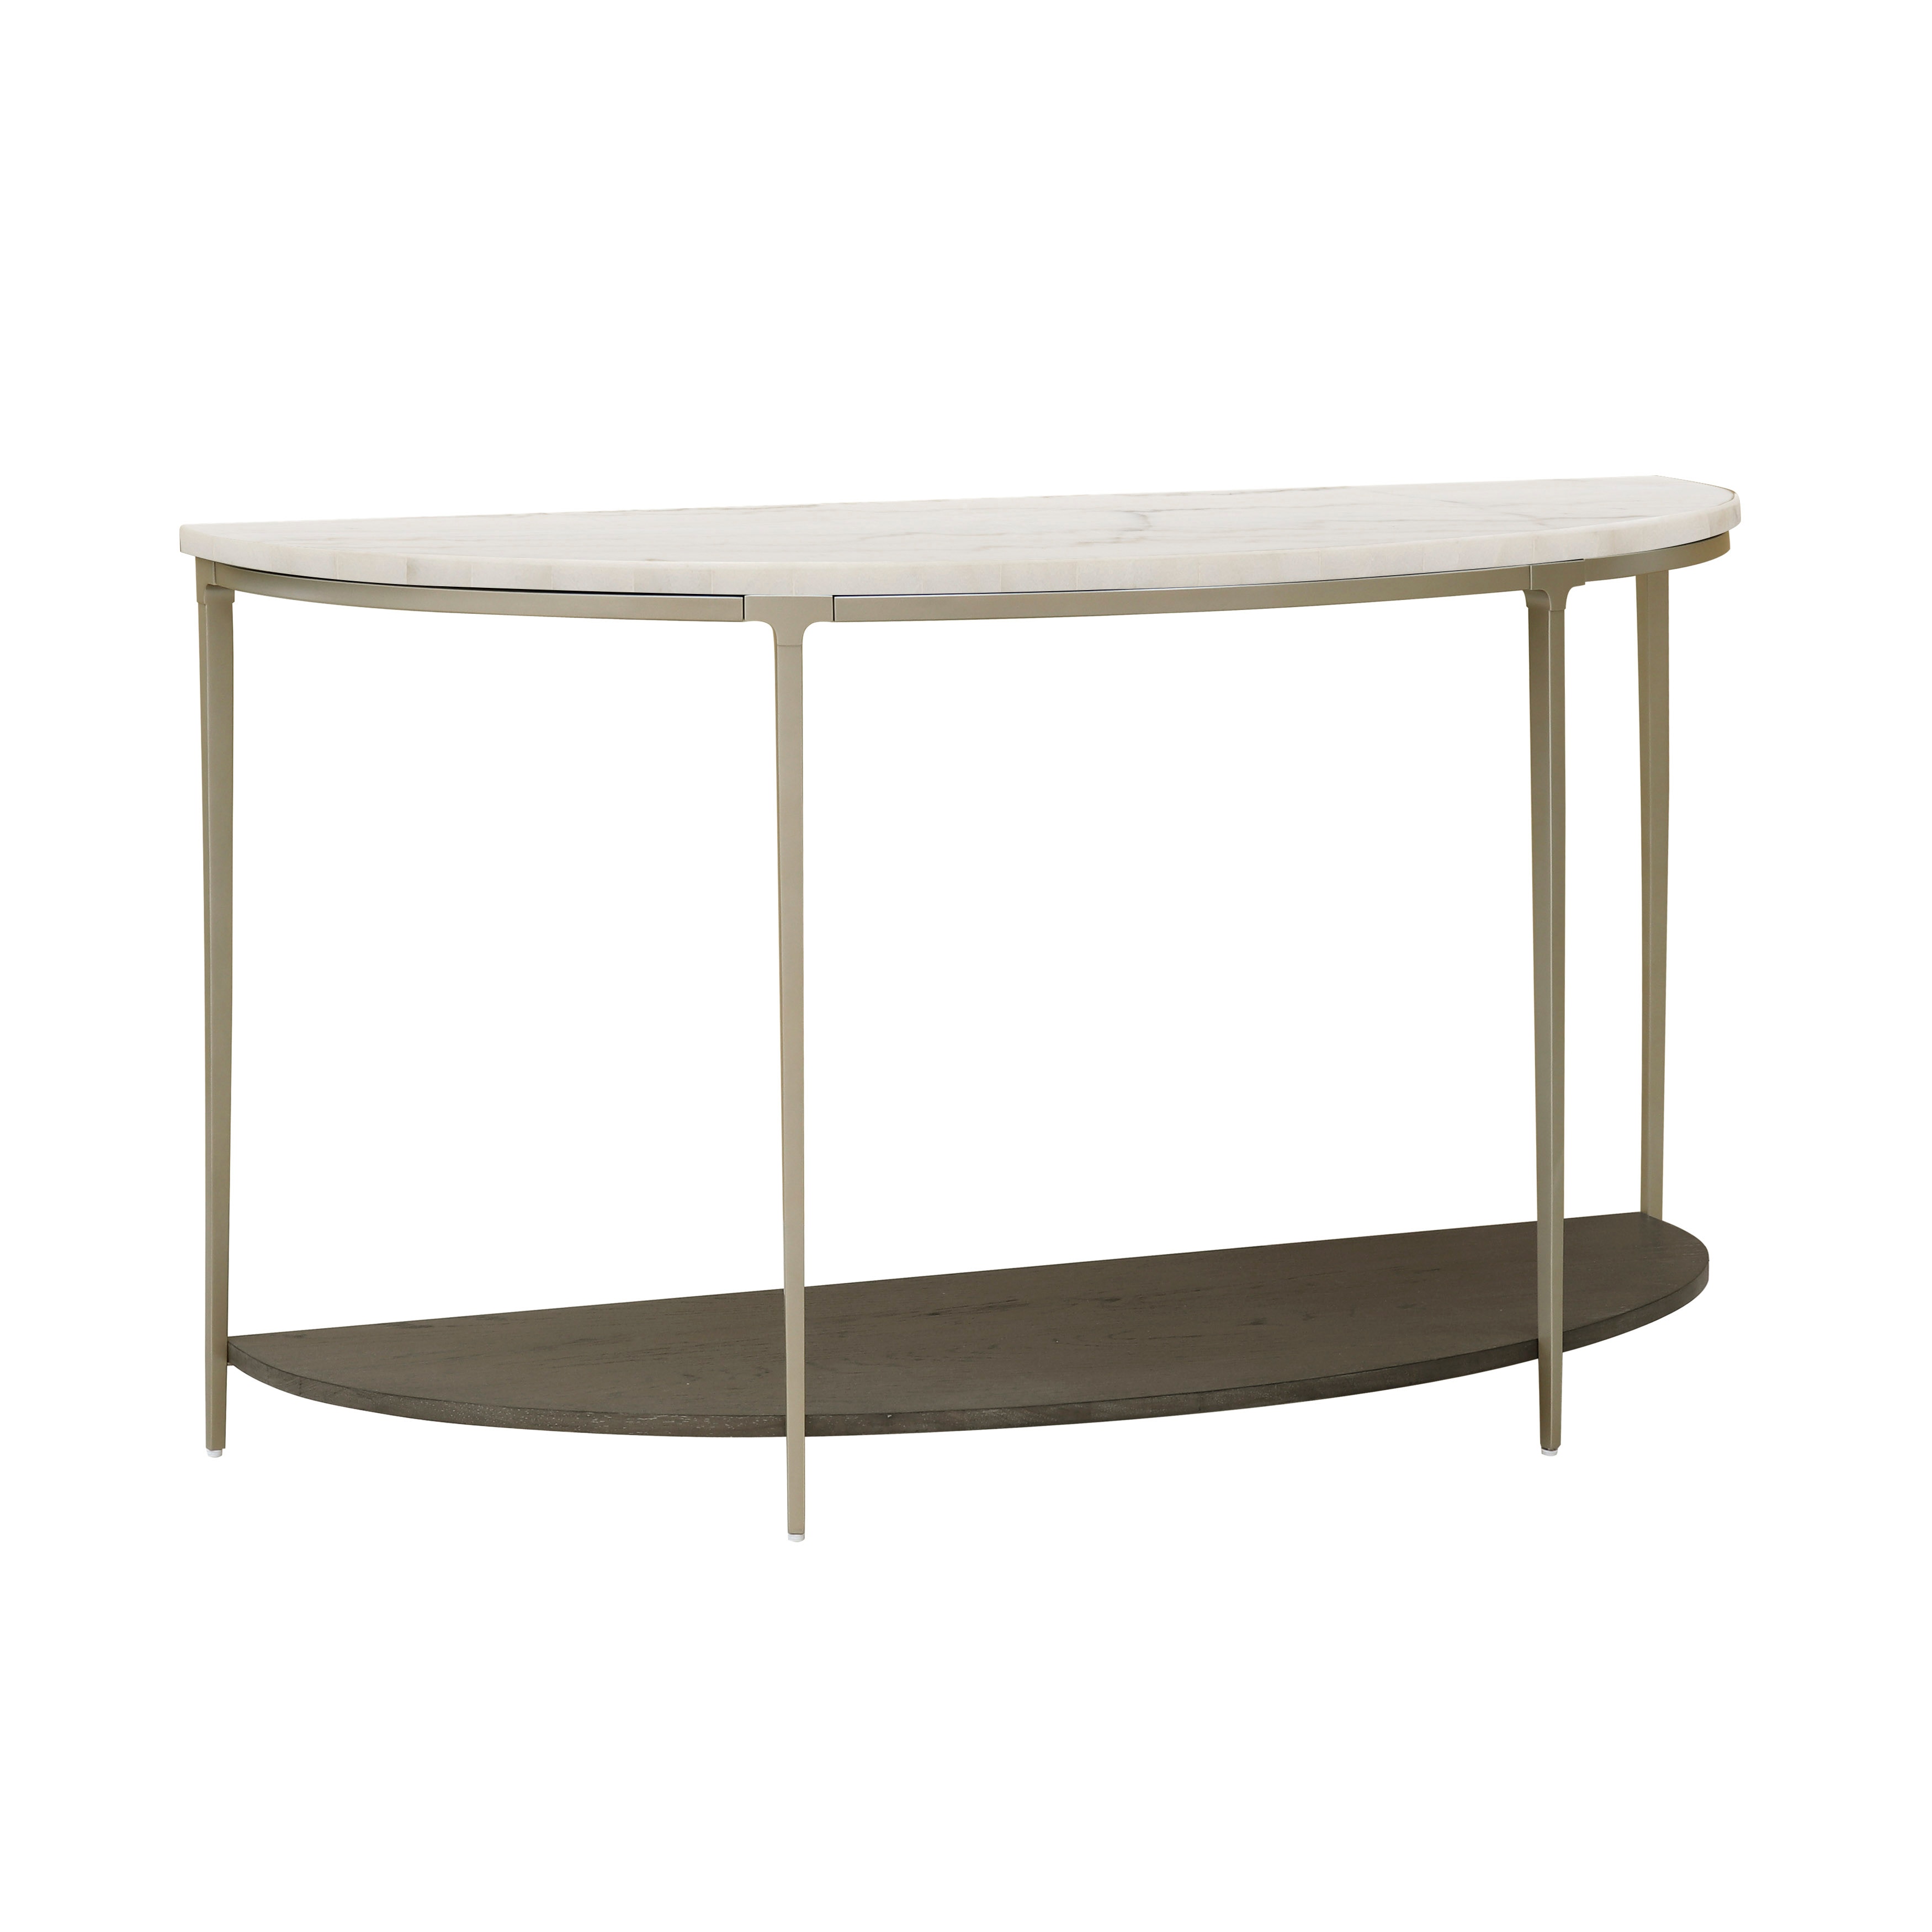 Drew & Jonathan Home Living Room Boulevard Stone Top Console Table 